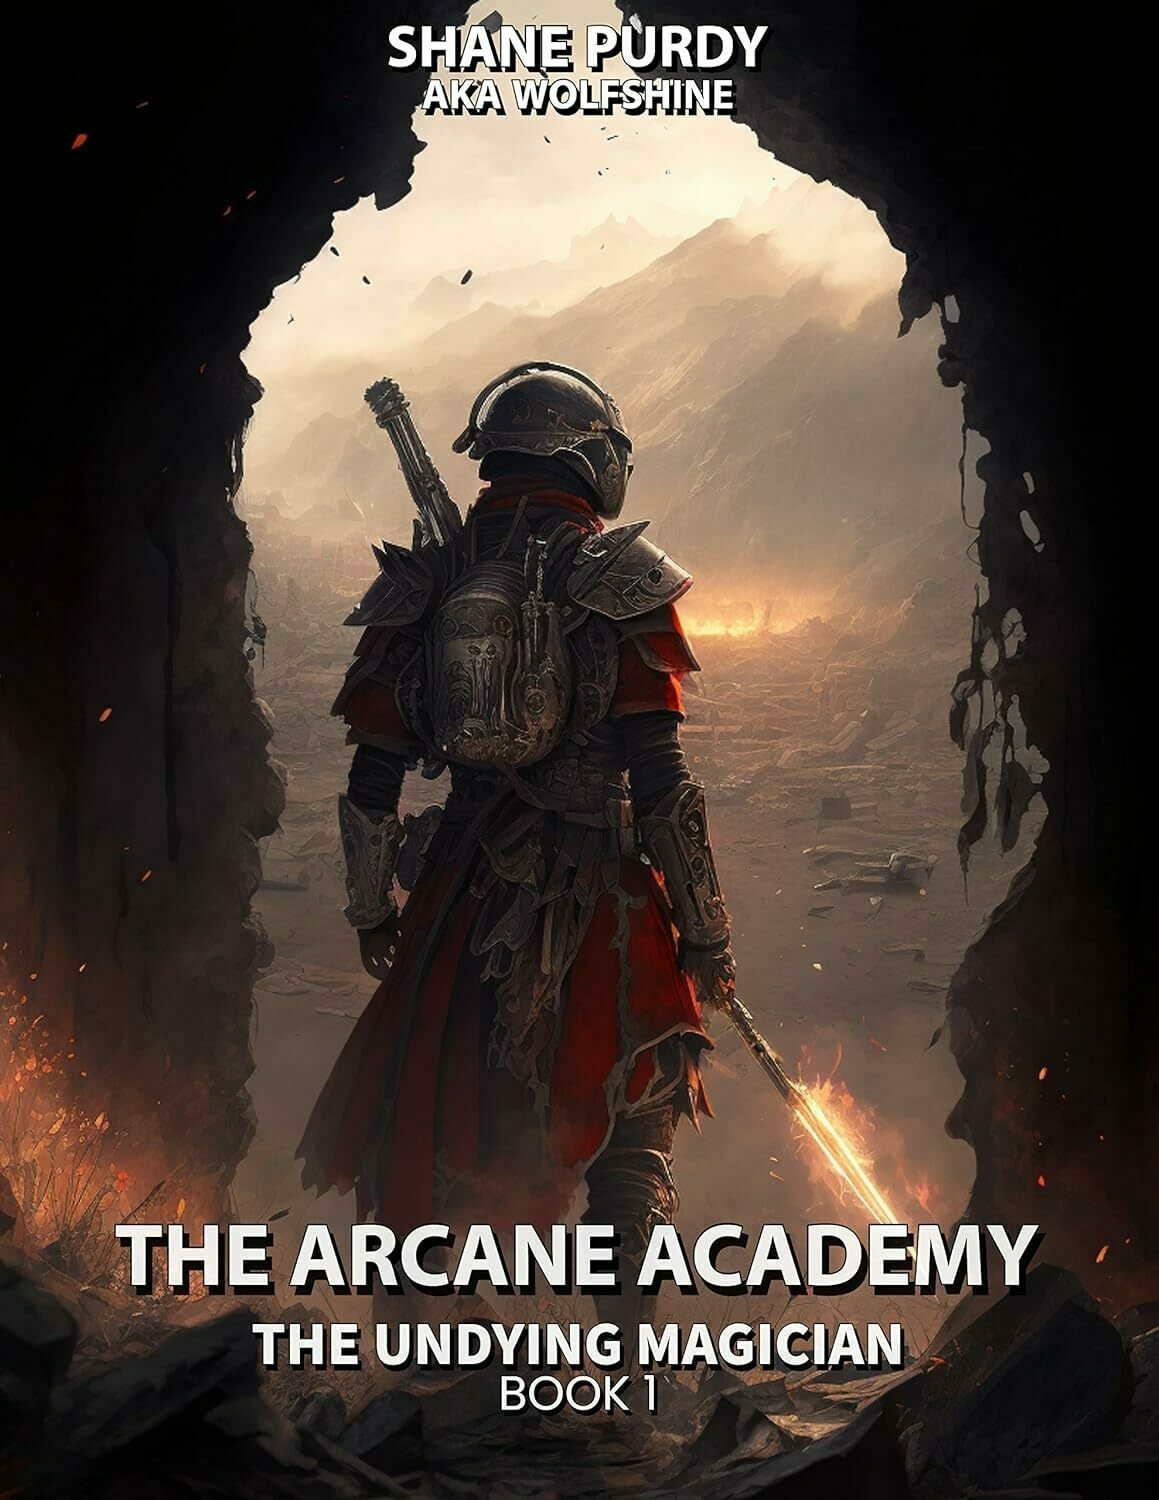 An armored knight gazes at a ruined landscape from a shadowed vantage point. Text: 'SHANE PURDY AKA WOLFSHINE - THE ARCANE ACADEMY THE UNDYING MAGICIAN BOOK 1'